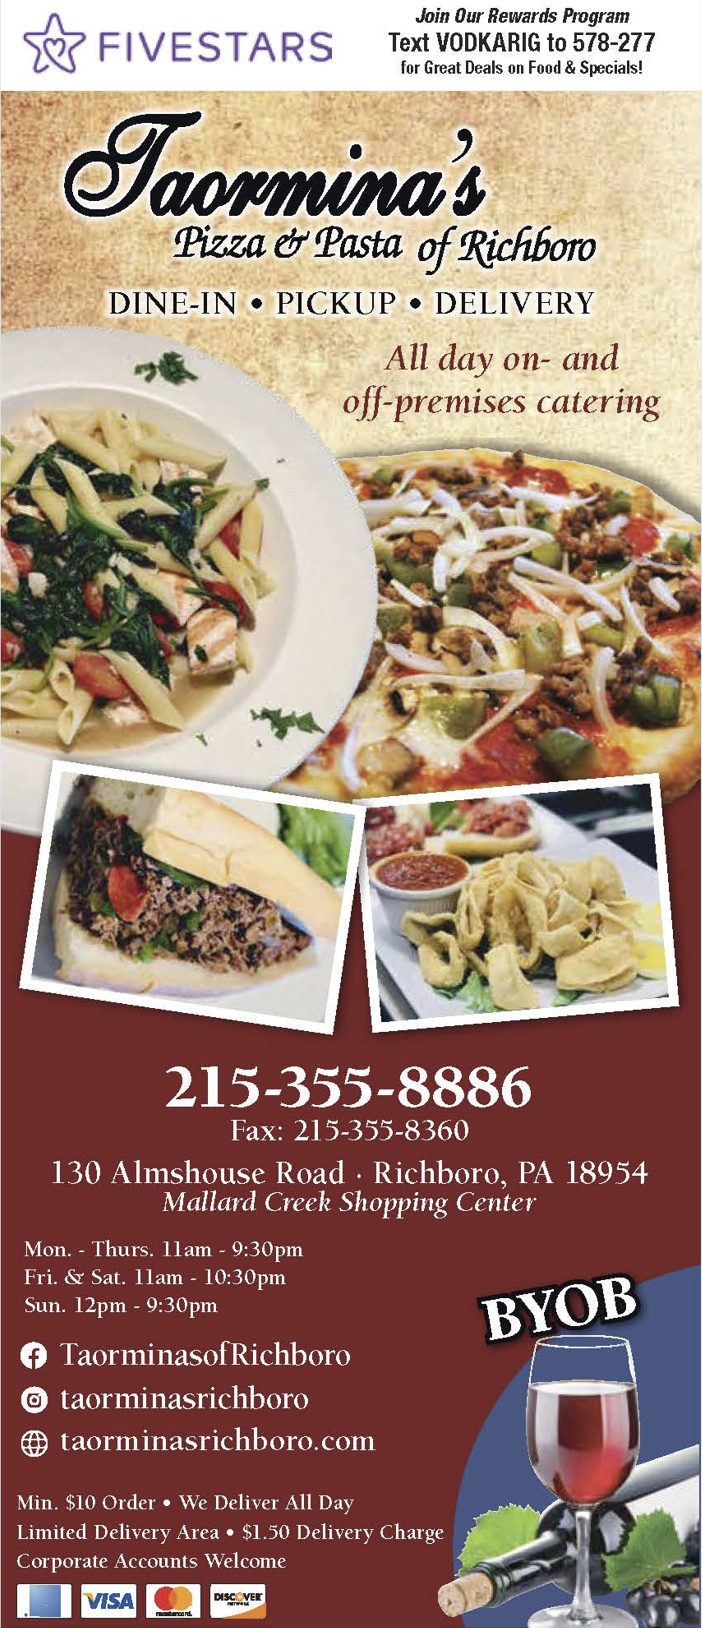 A flyer for taverna's pizza and bbq.